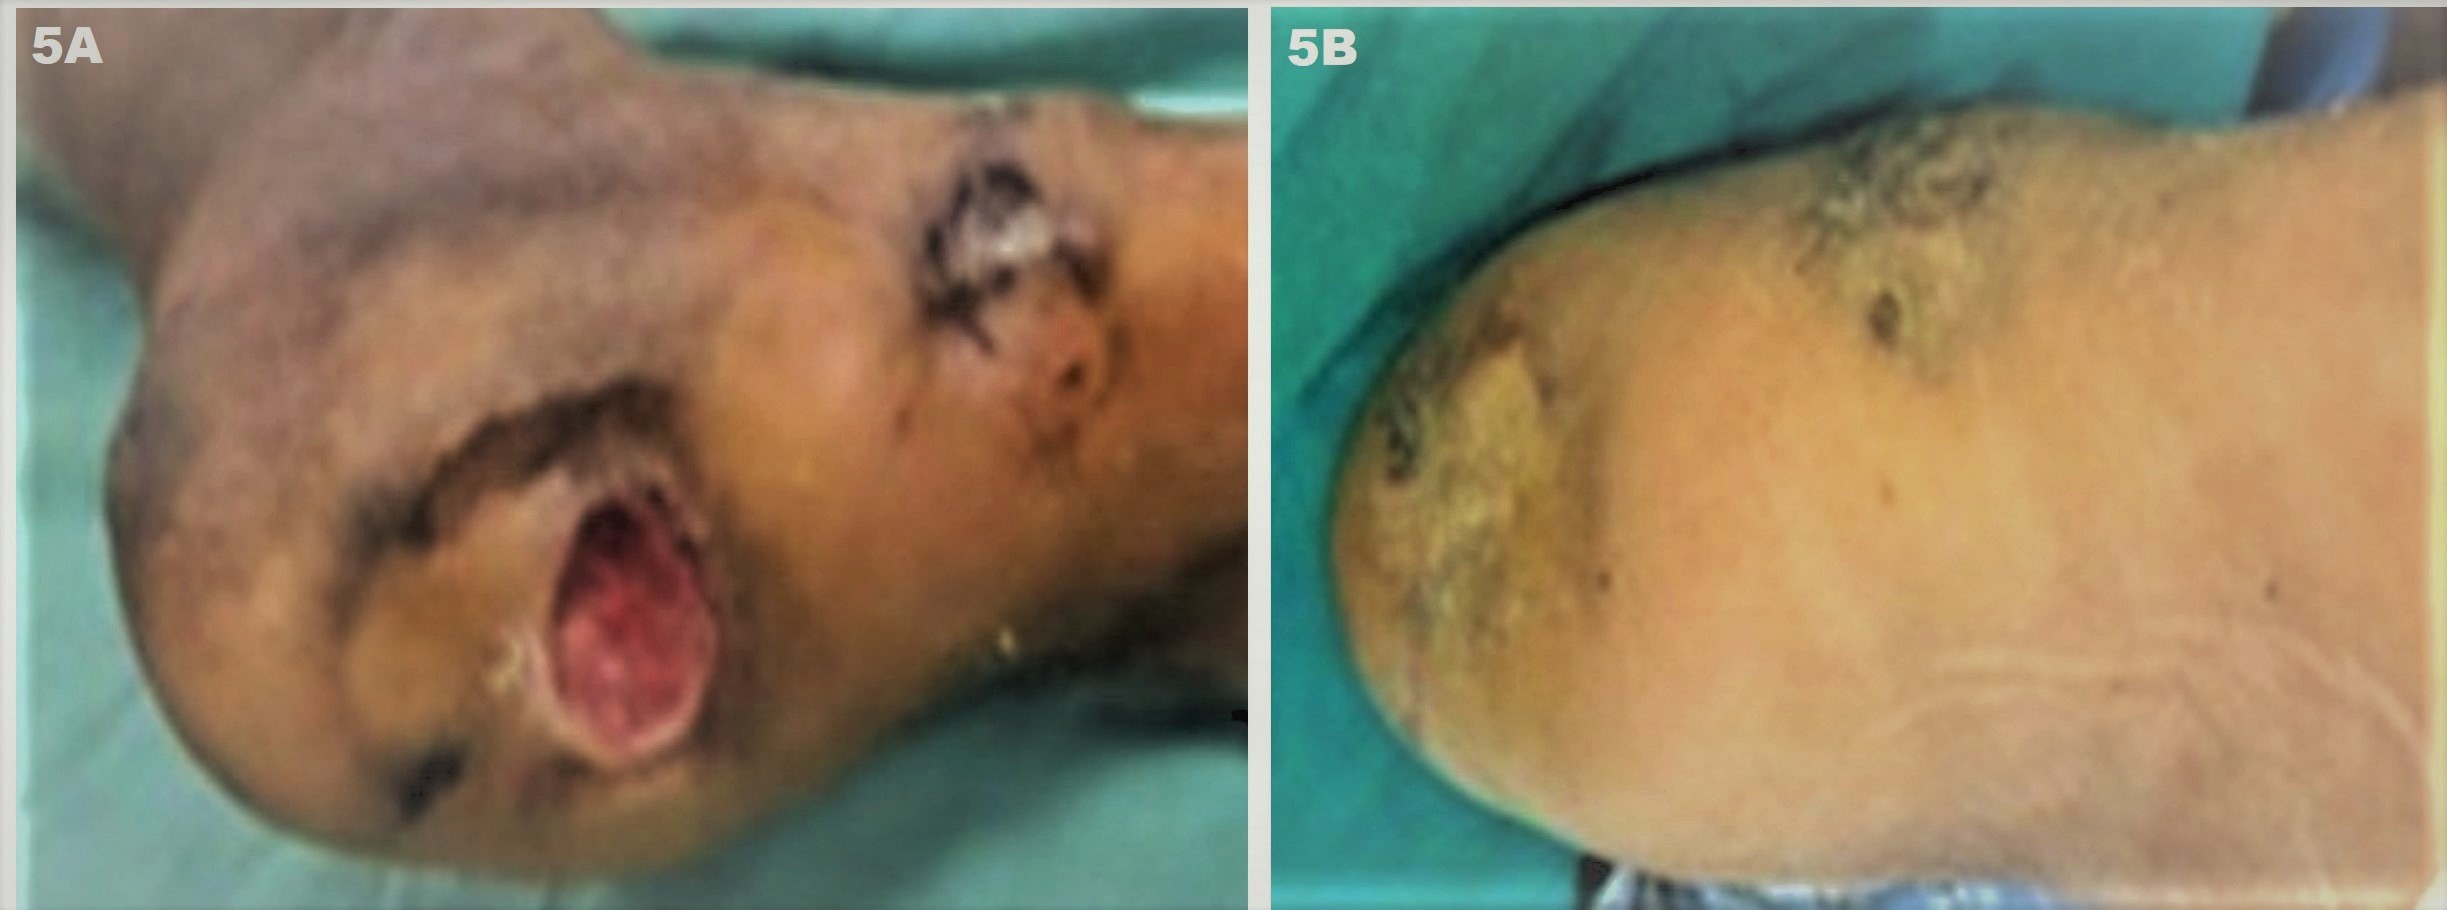 Figure 5. JODHPUR TECHNIQUE (JT) – Depiction of success of the technique in a non-healing foot ulcer of a diabetic patient with diabetic foot (diabetes controlled with HbA1C < 6.5 X one year). (A) Baseline multiple ulcers over the foot involving the heel and medial malleolus (pressure sites). The lesions are chronic non-healing ulcers (CNHUs) as they failed to heal despite multiple treatment sessions using collagen dressings, platelet-rich fibrin matrix (PRFM), hyberbaric oxygen as well as one flap transplant that necrosed within 4 weeks; and (B) Complete healing of ulcers can be appreciated after 3 months of two sessions of JT performed  one month apart.  